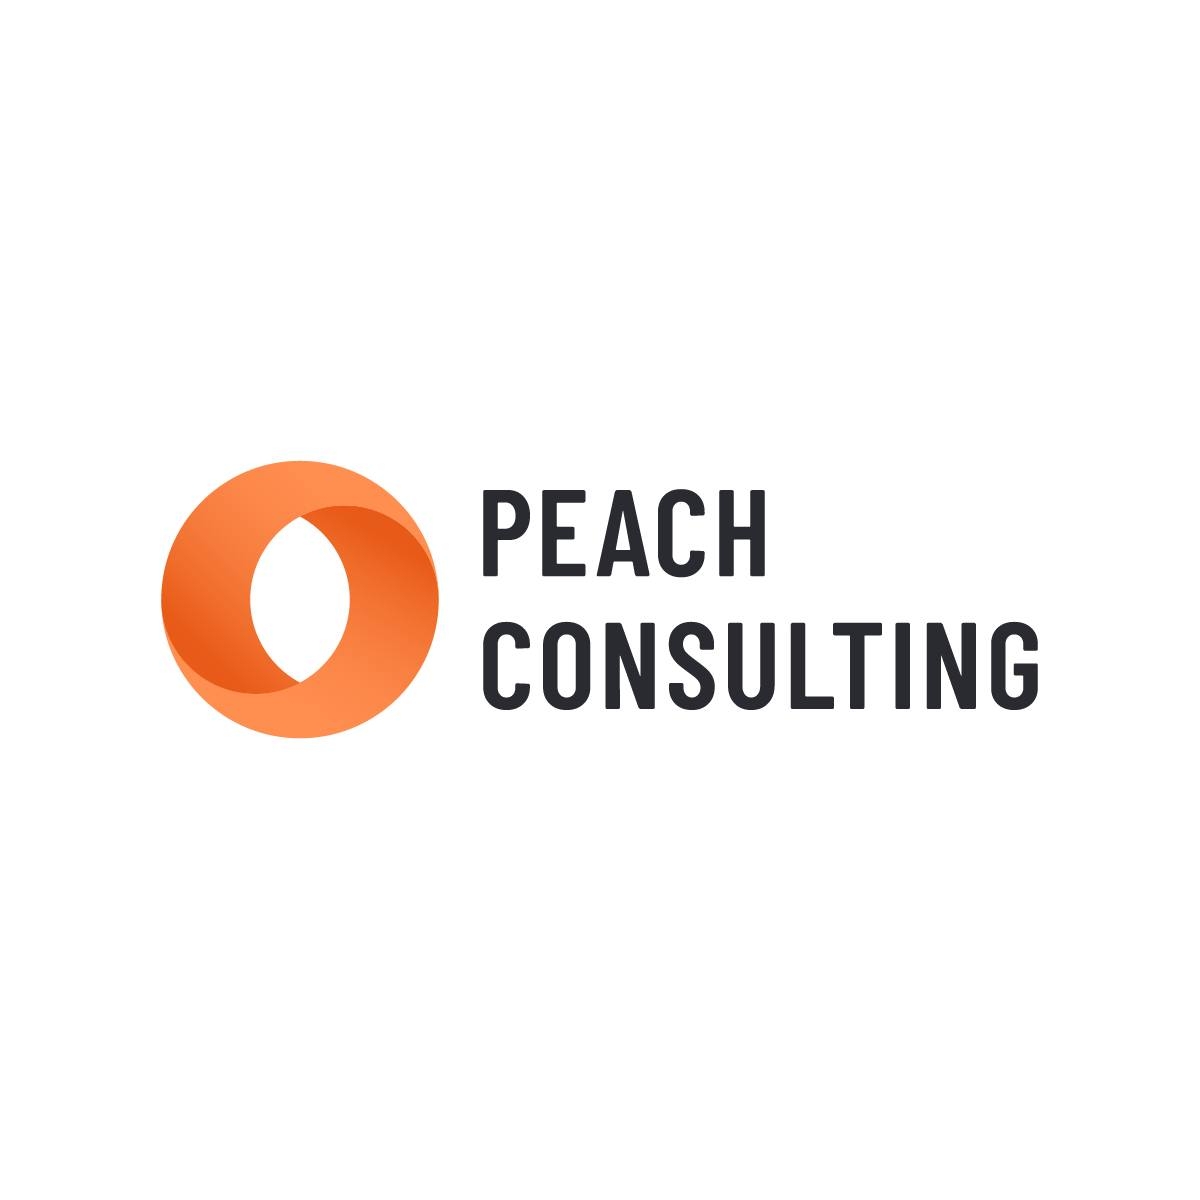 Công ty PEACH Consulting